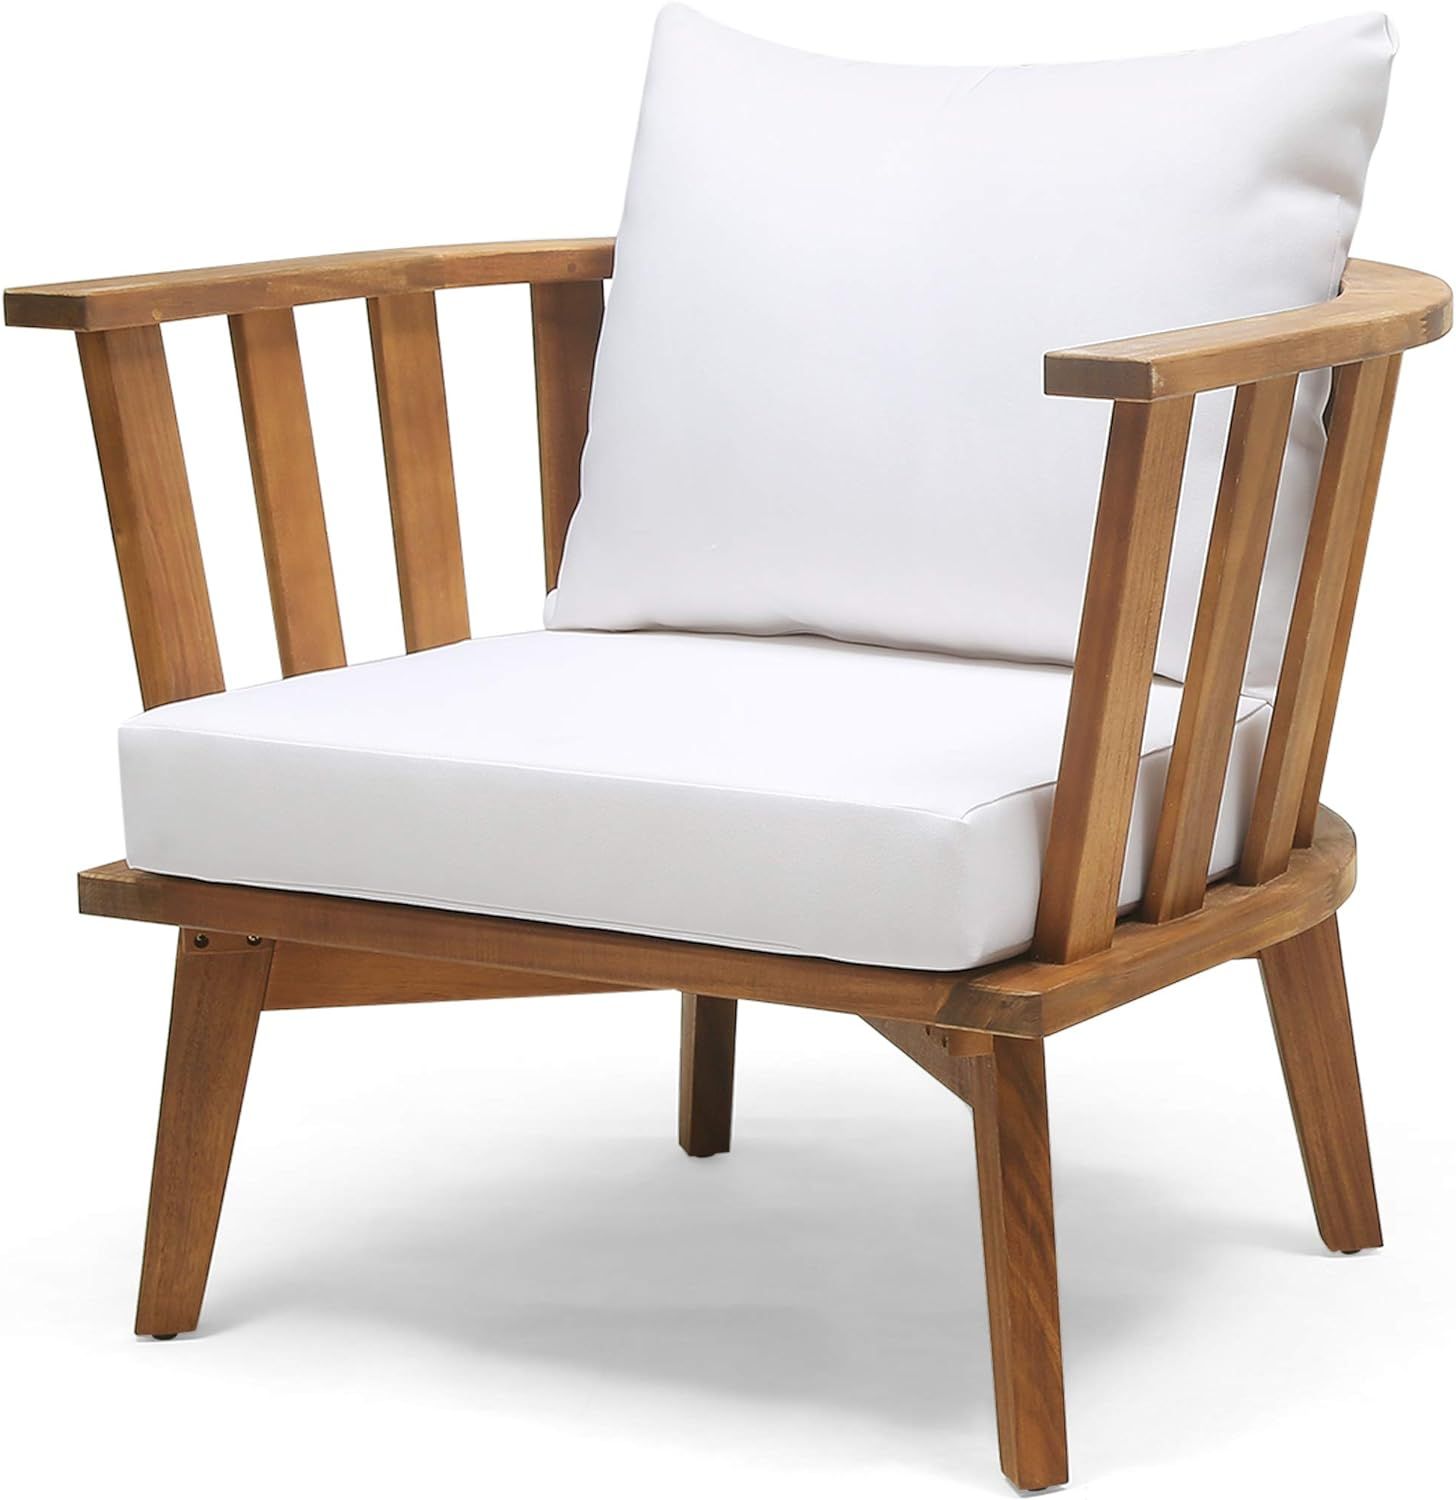 Christopher Knight Home 309123 Dean Outdoor Wooden Club Chair with Cushions, White and Teak Finis... | Amazon (US)